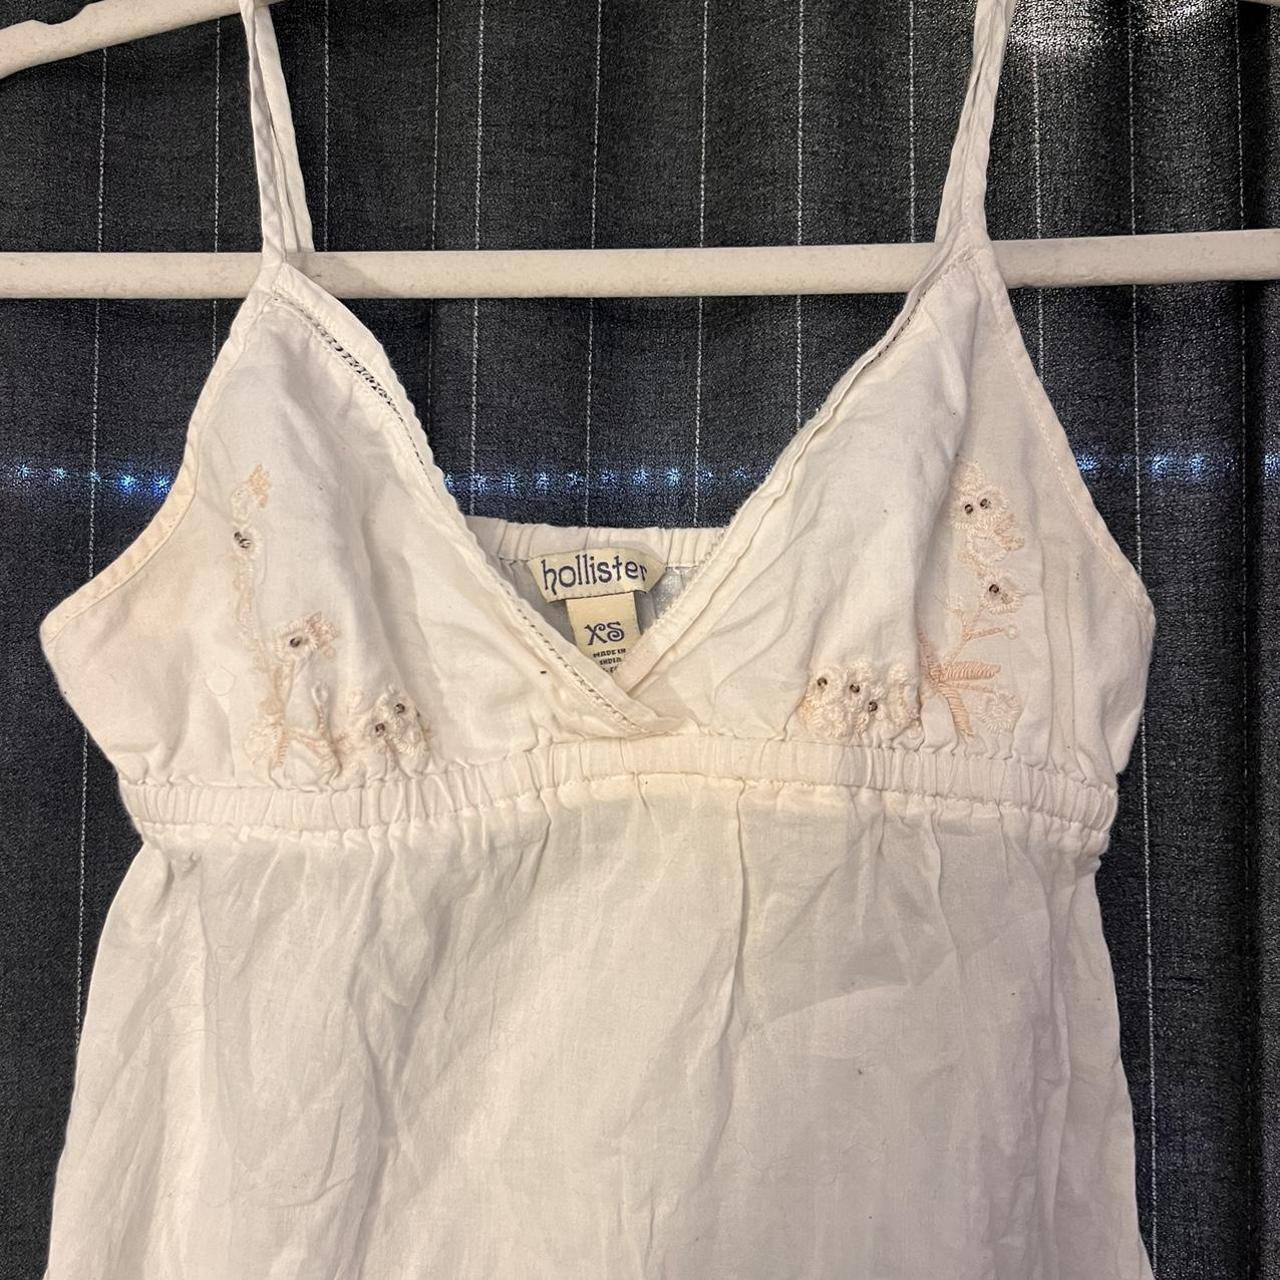 Hollister Co. Women's White and Pink Vest | Depop